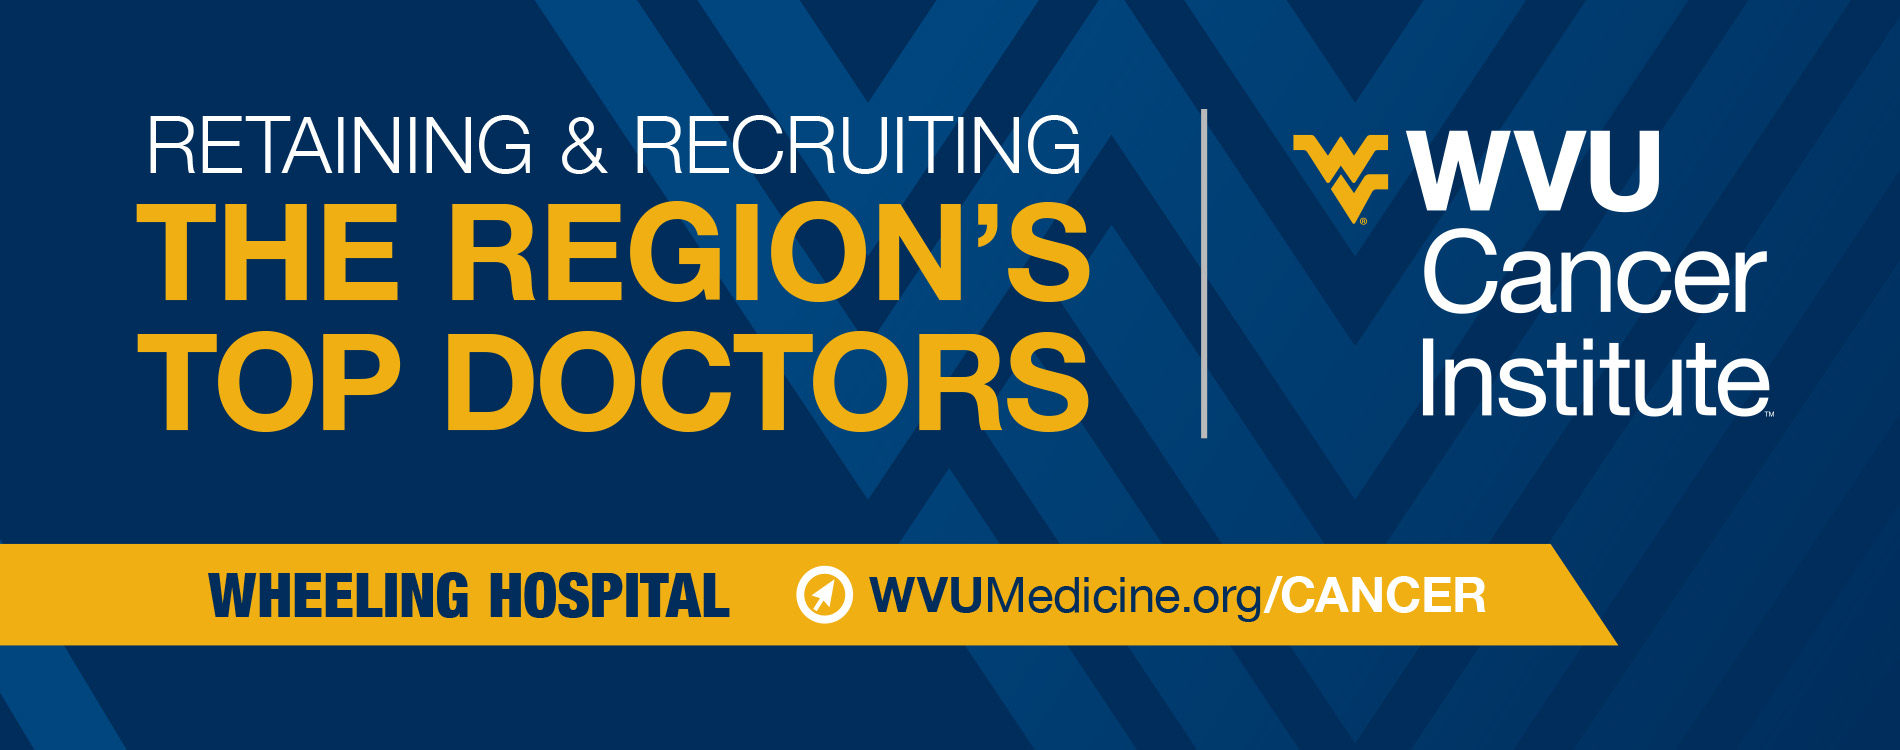 Retaining and recruiting the regions top doctors. WVU Cancer Institute. Wheeling Hospital. wvumedicine.org/cancer.